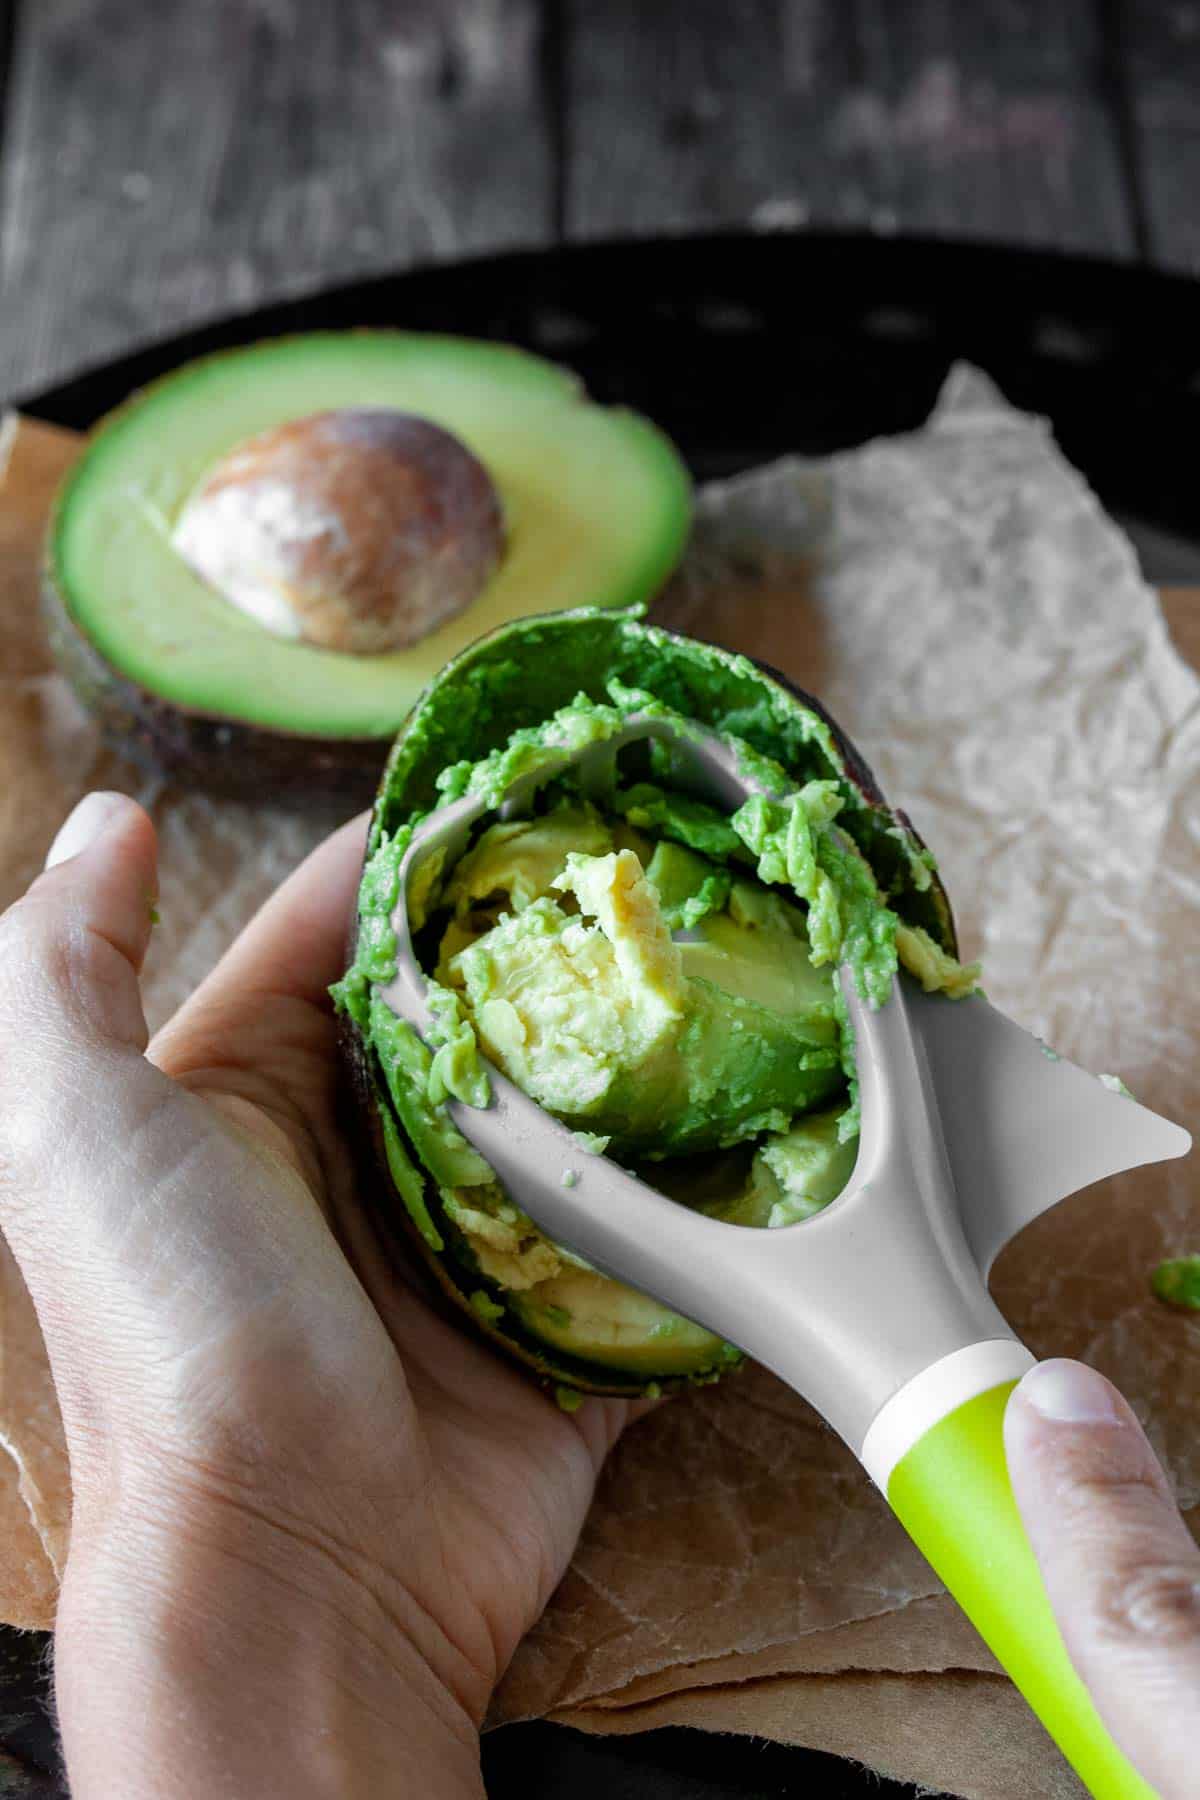 Kitchen tool scraping avocado from peel to make a loaded guacamole dip with vegan cotija cheese